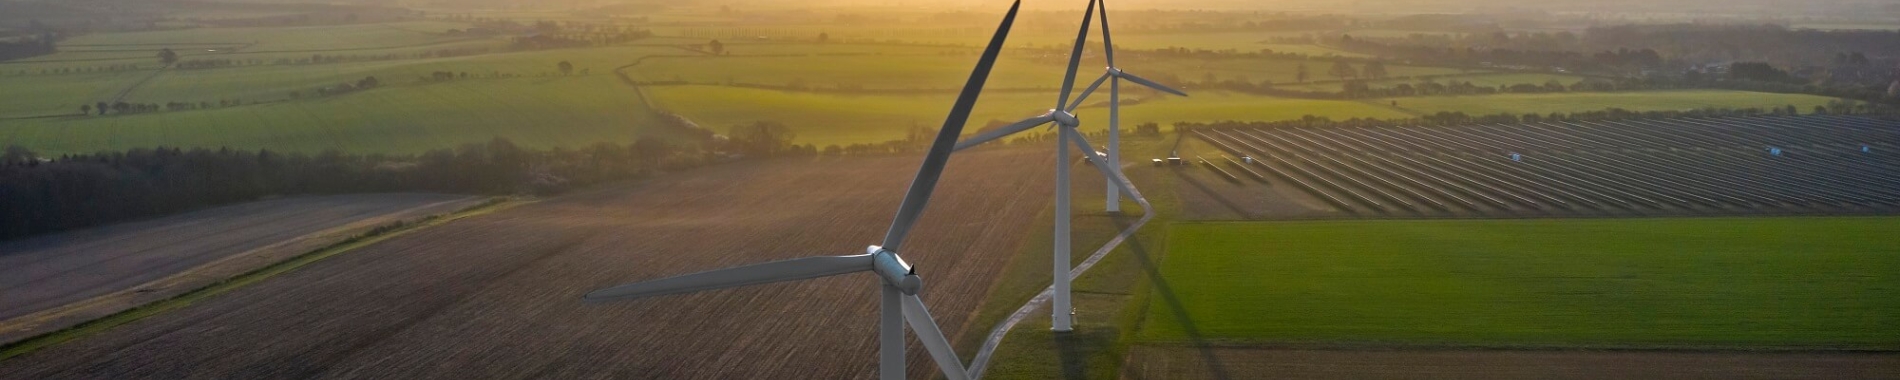 image of wind turbines and solar panels in English countryside taken from above 